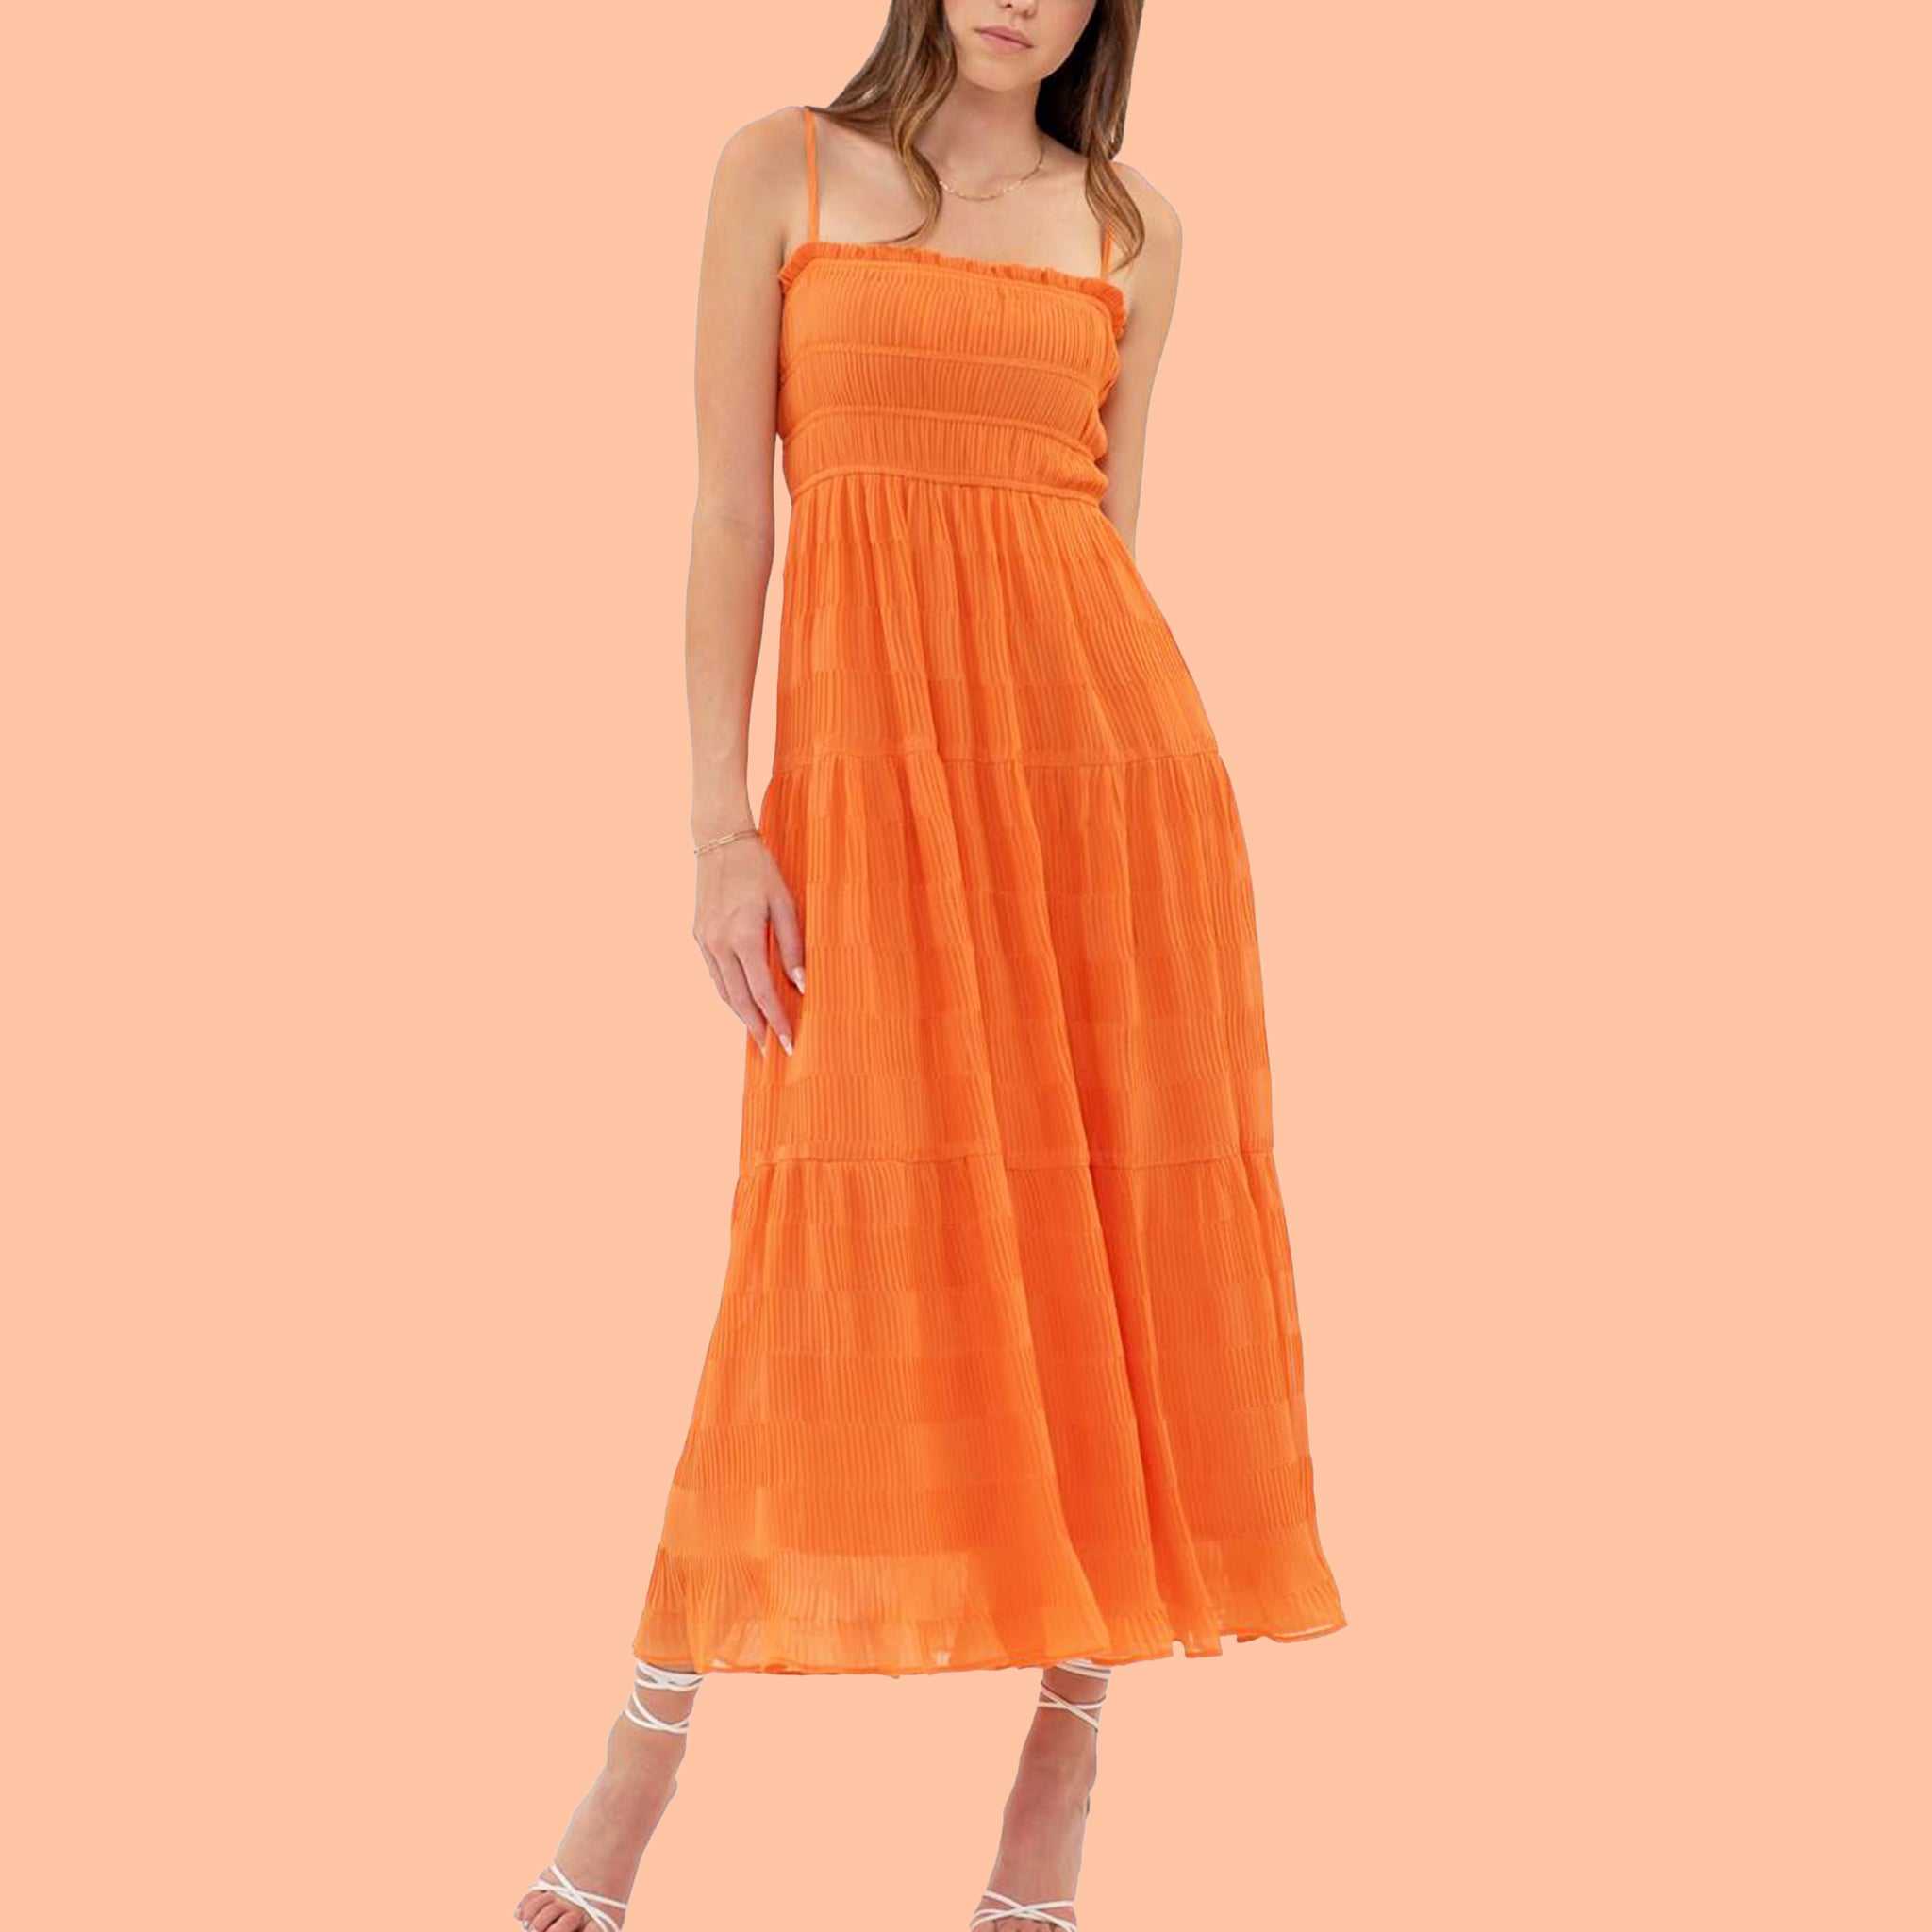 On a peach background is vibrant orange tiered midi dress with a smocked bodice and spaghetti straps. 